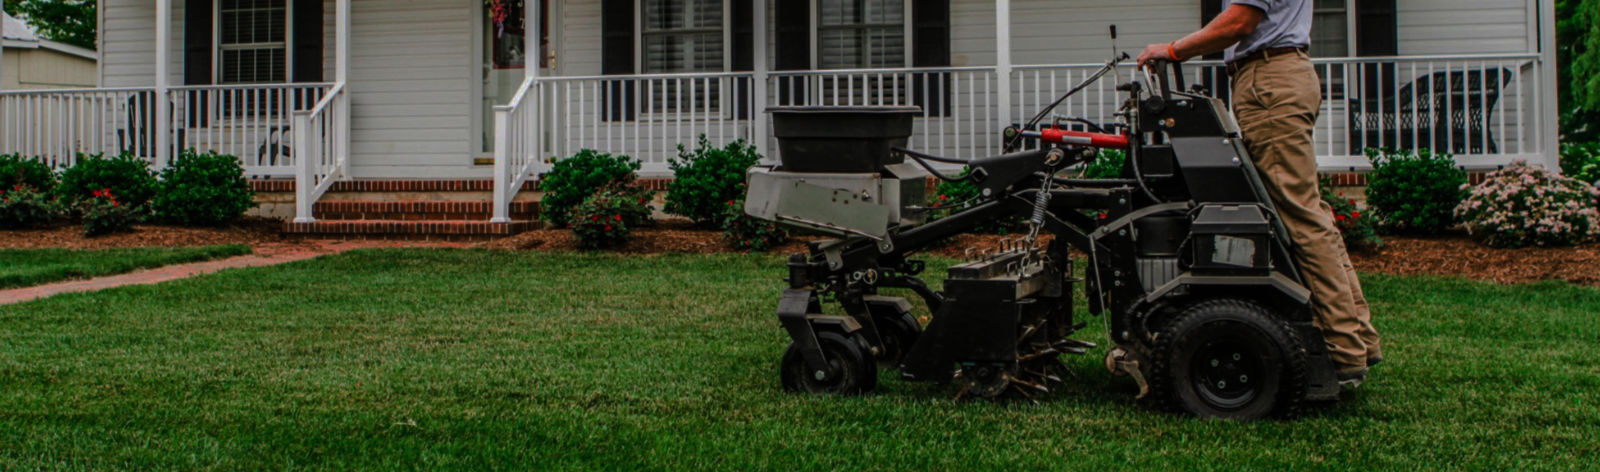 Lawn Aeration Services in Illinois